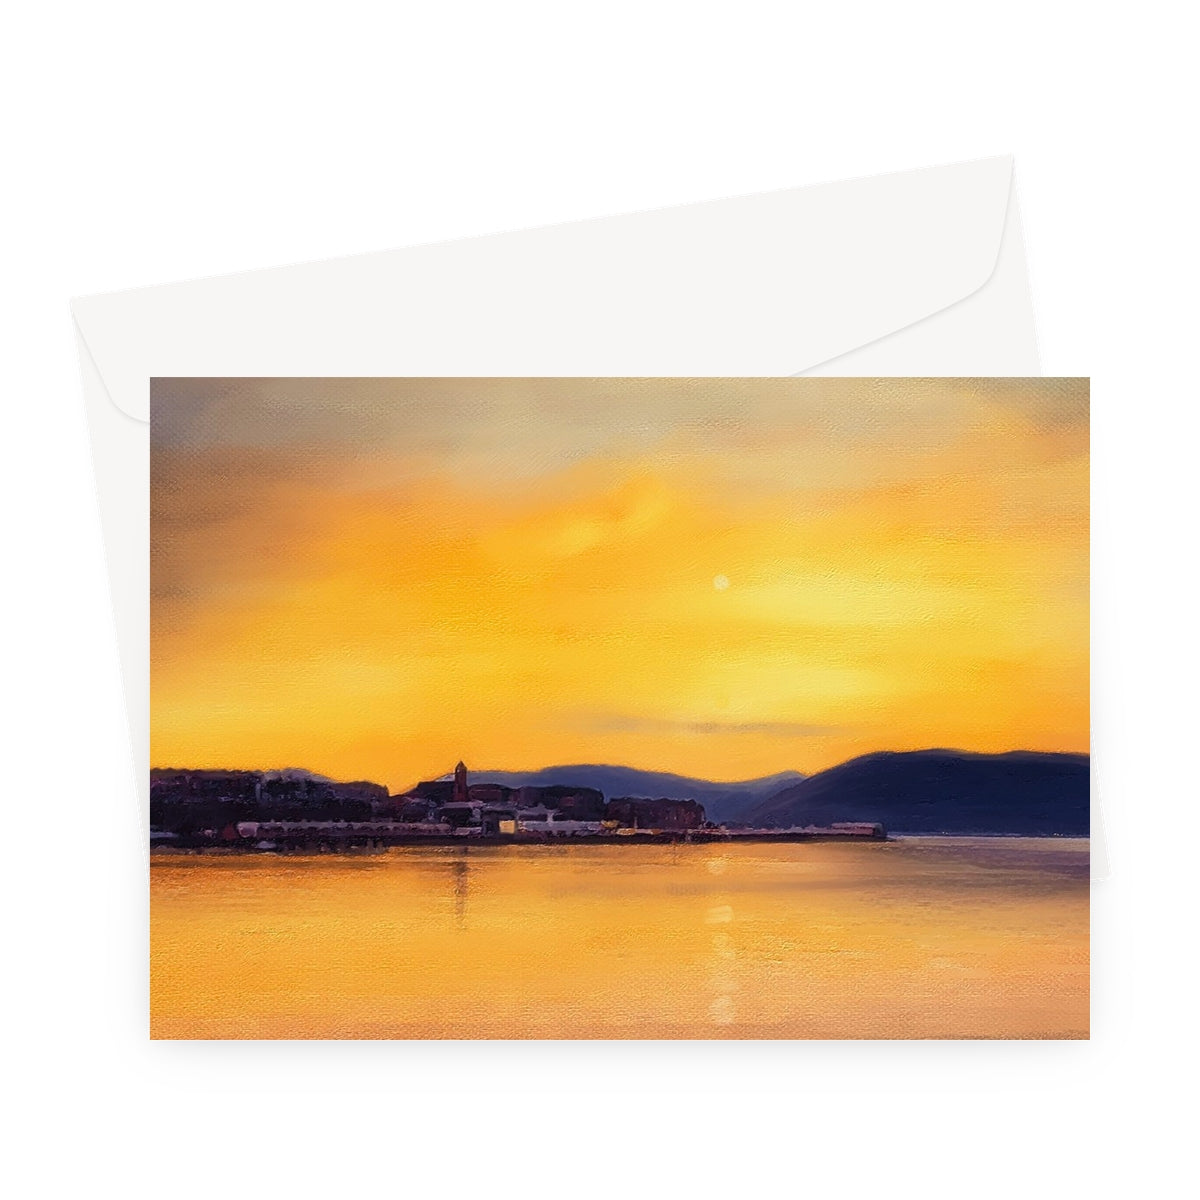 Gourock From Cardwell Bay Art Gifts Greeting Card-Stationery-River Clyde Art Gallery-A5 Landscape-1 Card-Paintings, Prints, Homeware, Art Gifts From Scotland By Scottish Artist Kevin Hunter